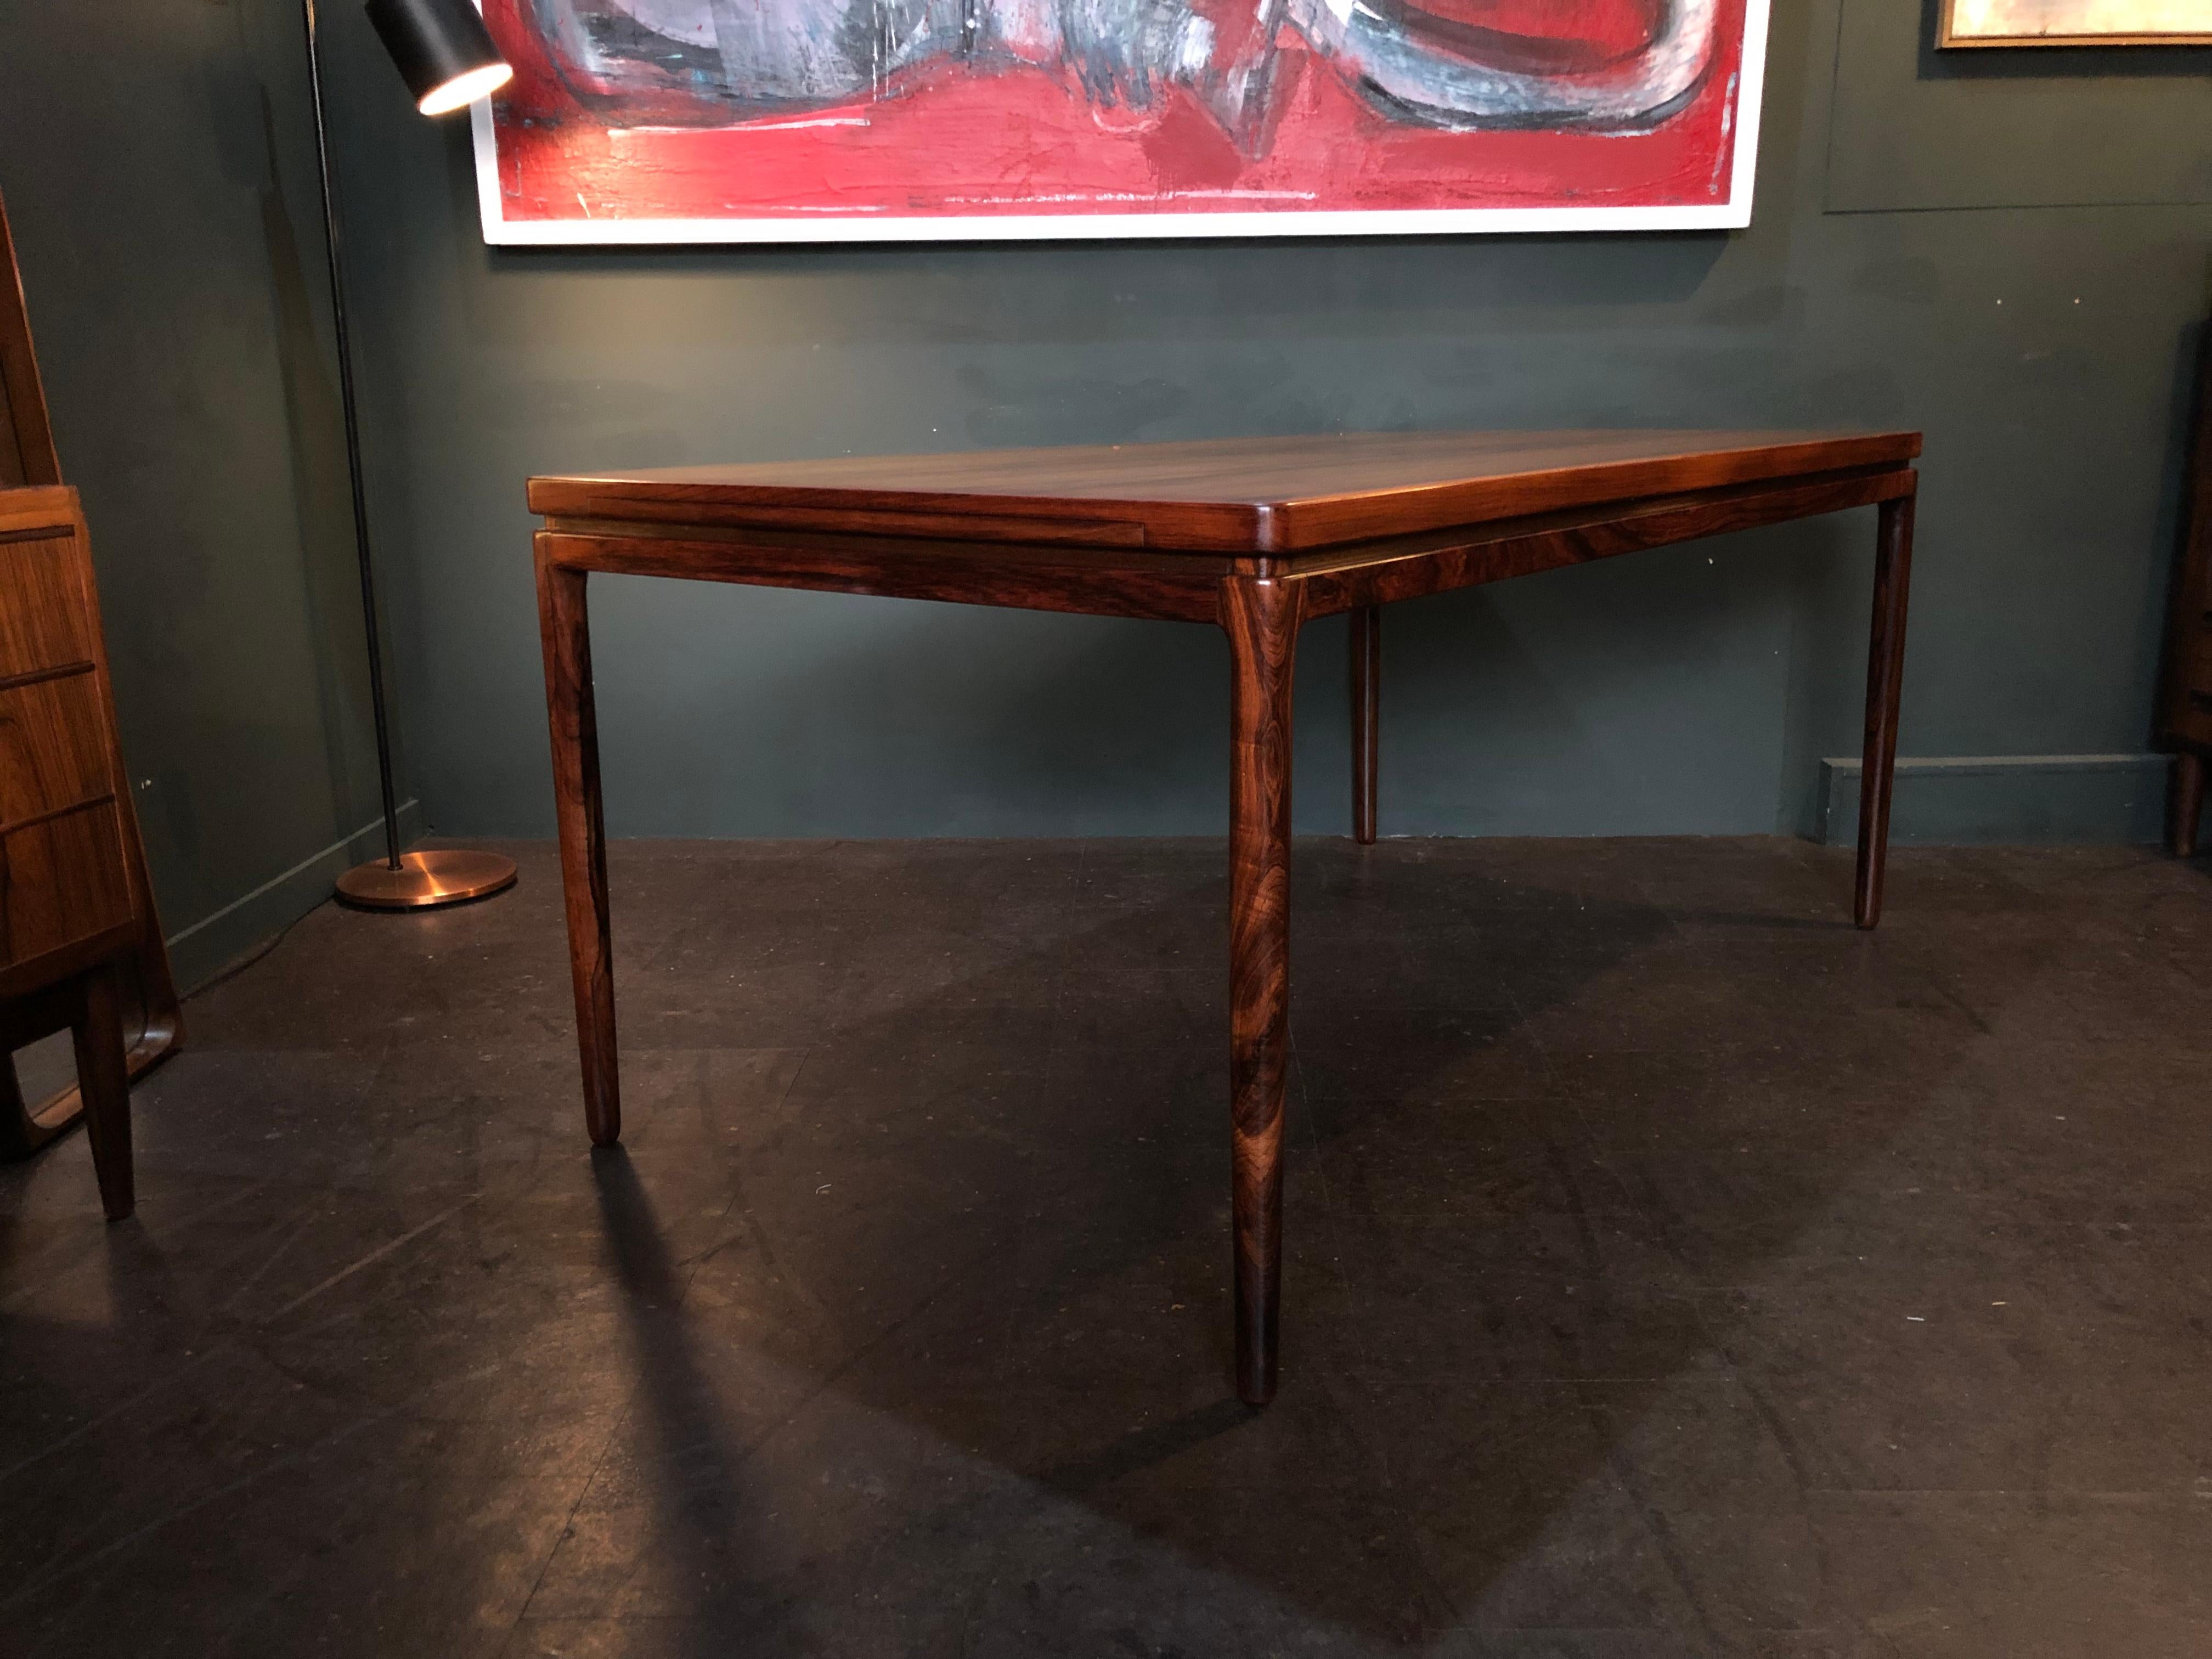 A stunning large midcentury Danish rosewood dining table designed by Johannes Andersen for Christian Linneberg, Denmark, circa 1960. Finest quality craftsmanship and wonderful design as you would expect from Andersen and Linneberg. A Large size